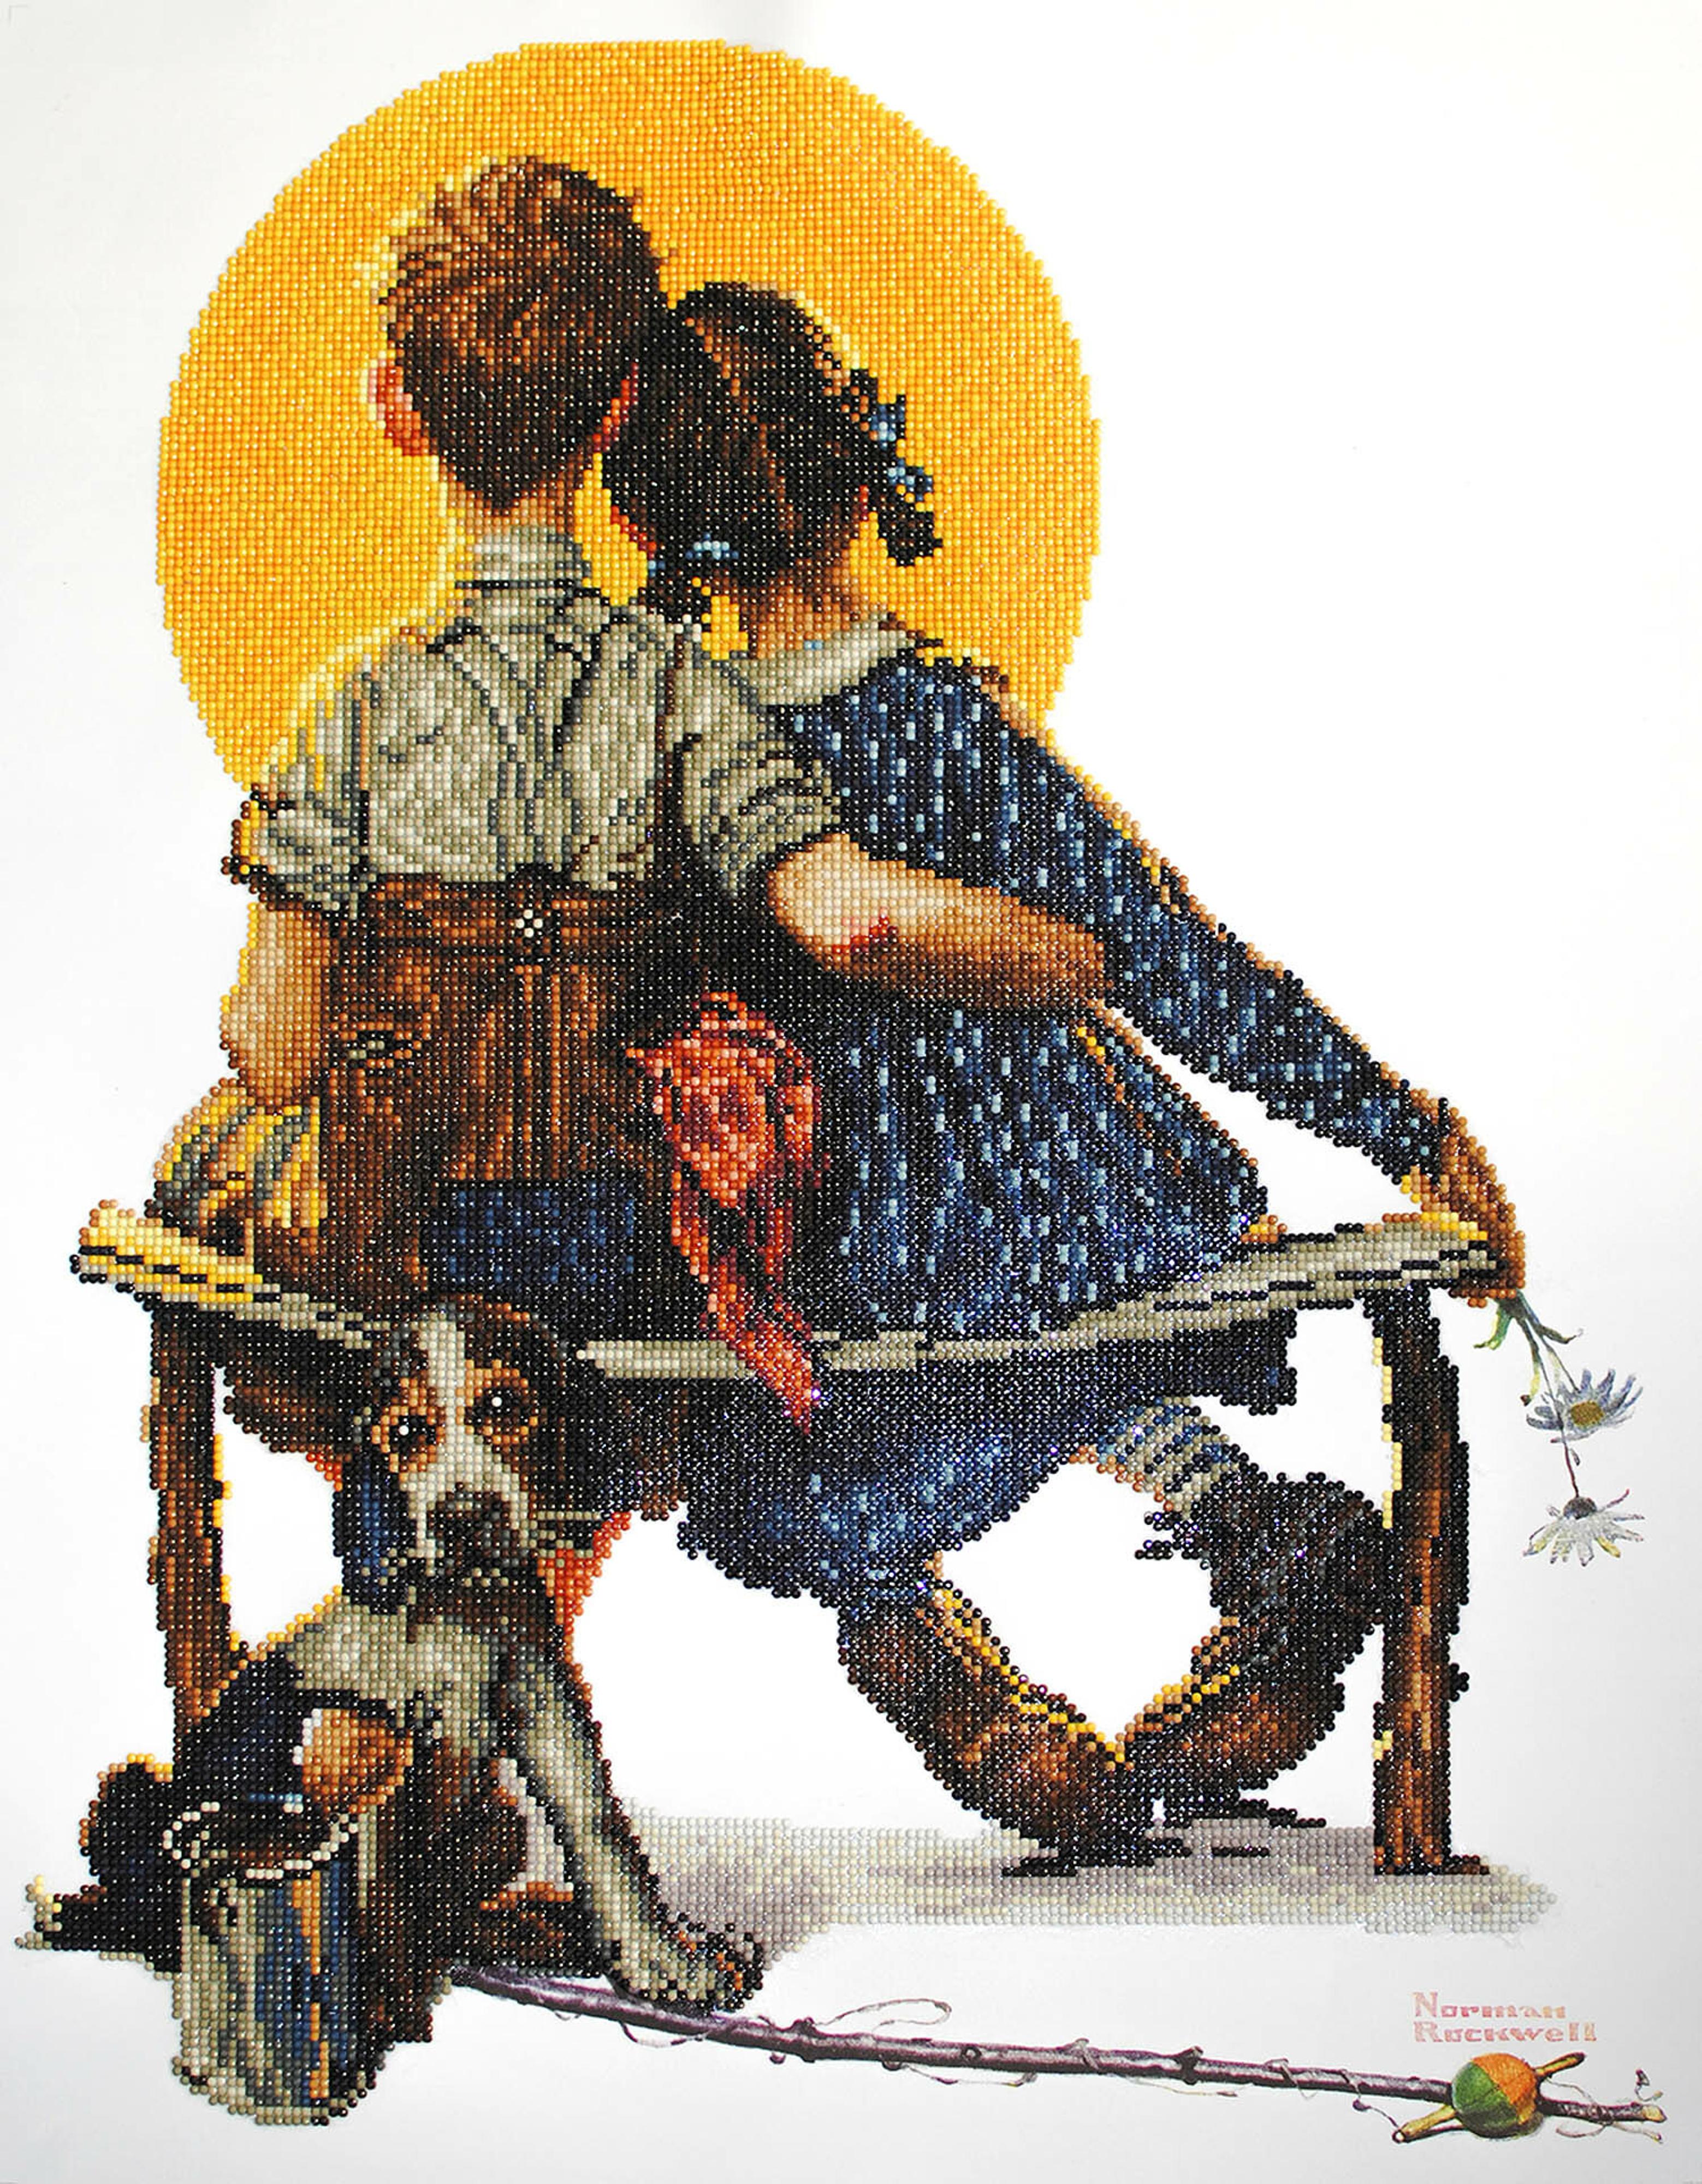 Norman Rockwell Boy and Girl Gazing at the Moon Diamond Painting Kit